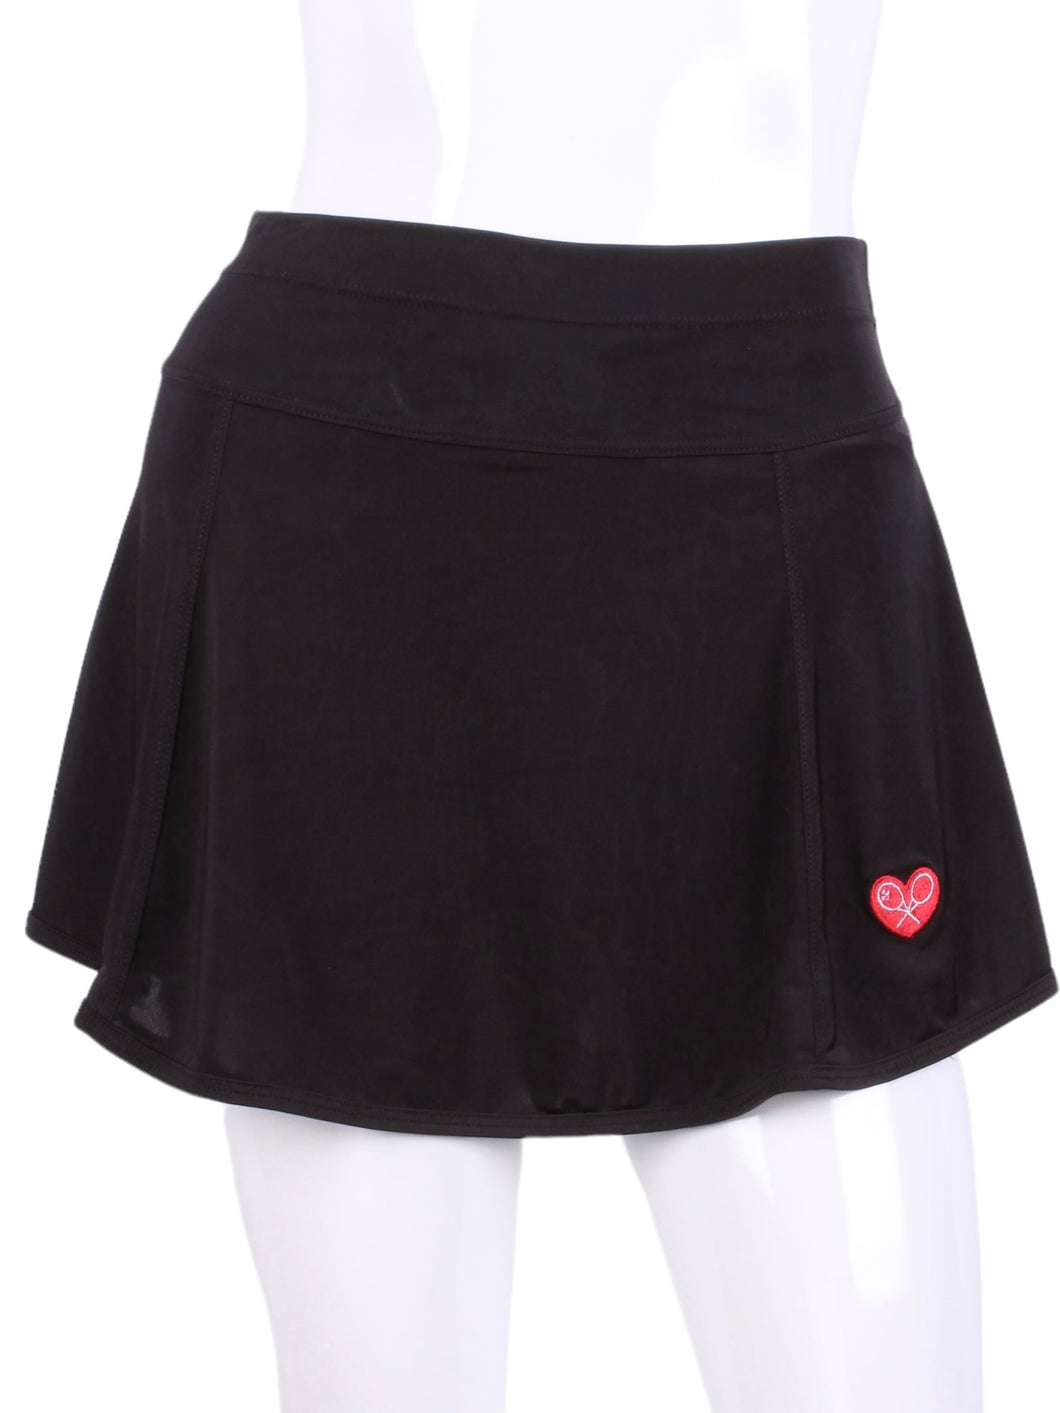  This is our limited edition Gladiator Skirt Black.  This piece has a silky soft and quick-drying matching shorties, and binding to match.  We make these in very small quantities - by design.  Unique.  Luxurious.  Comfortable.  Cool.  Fun.